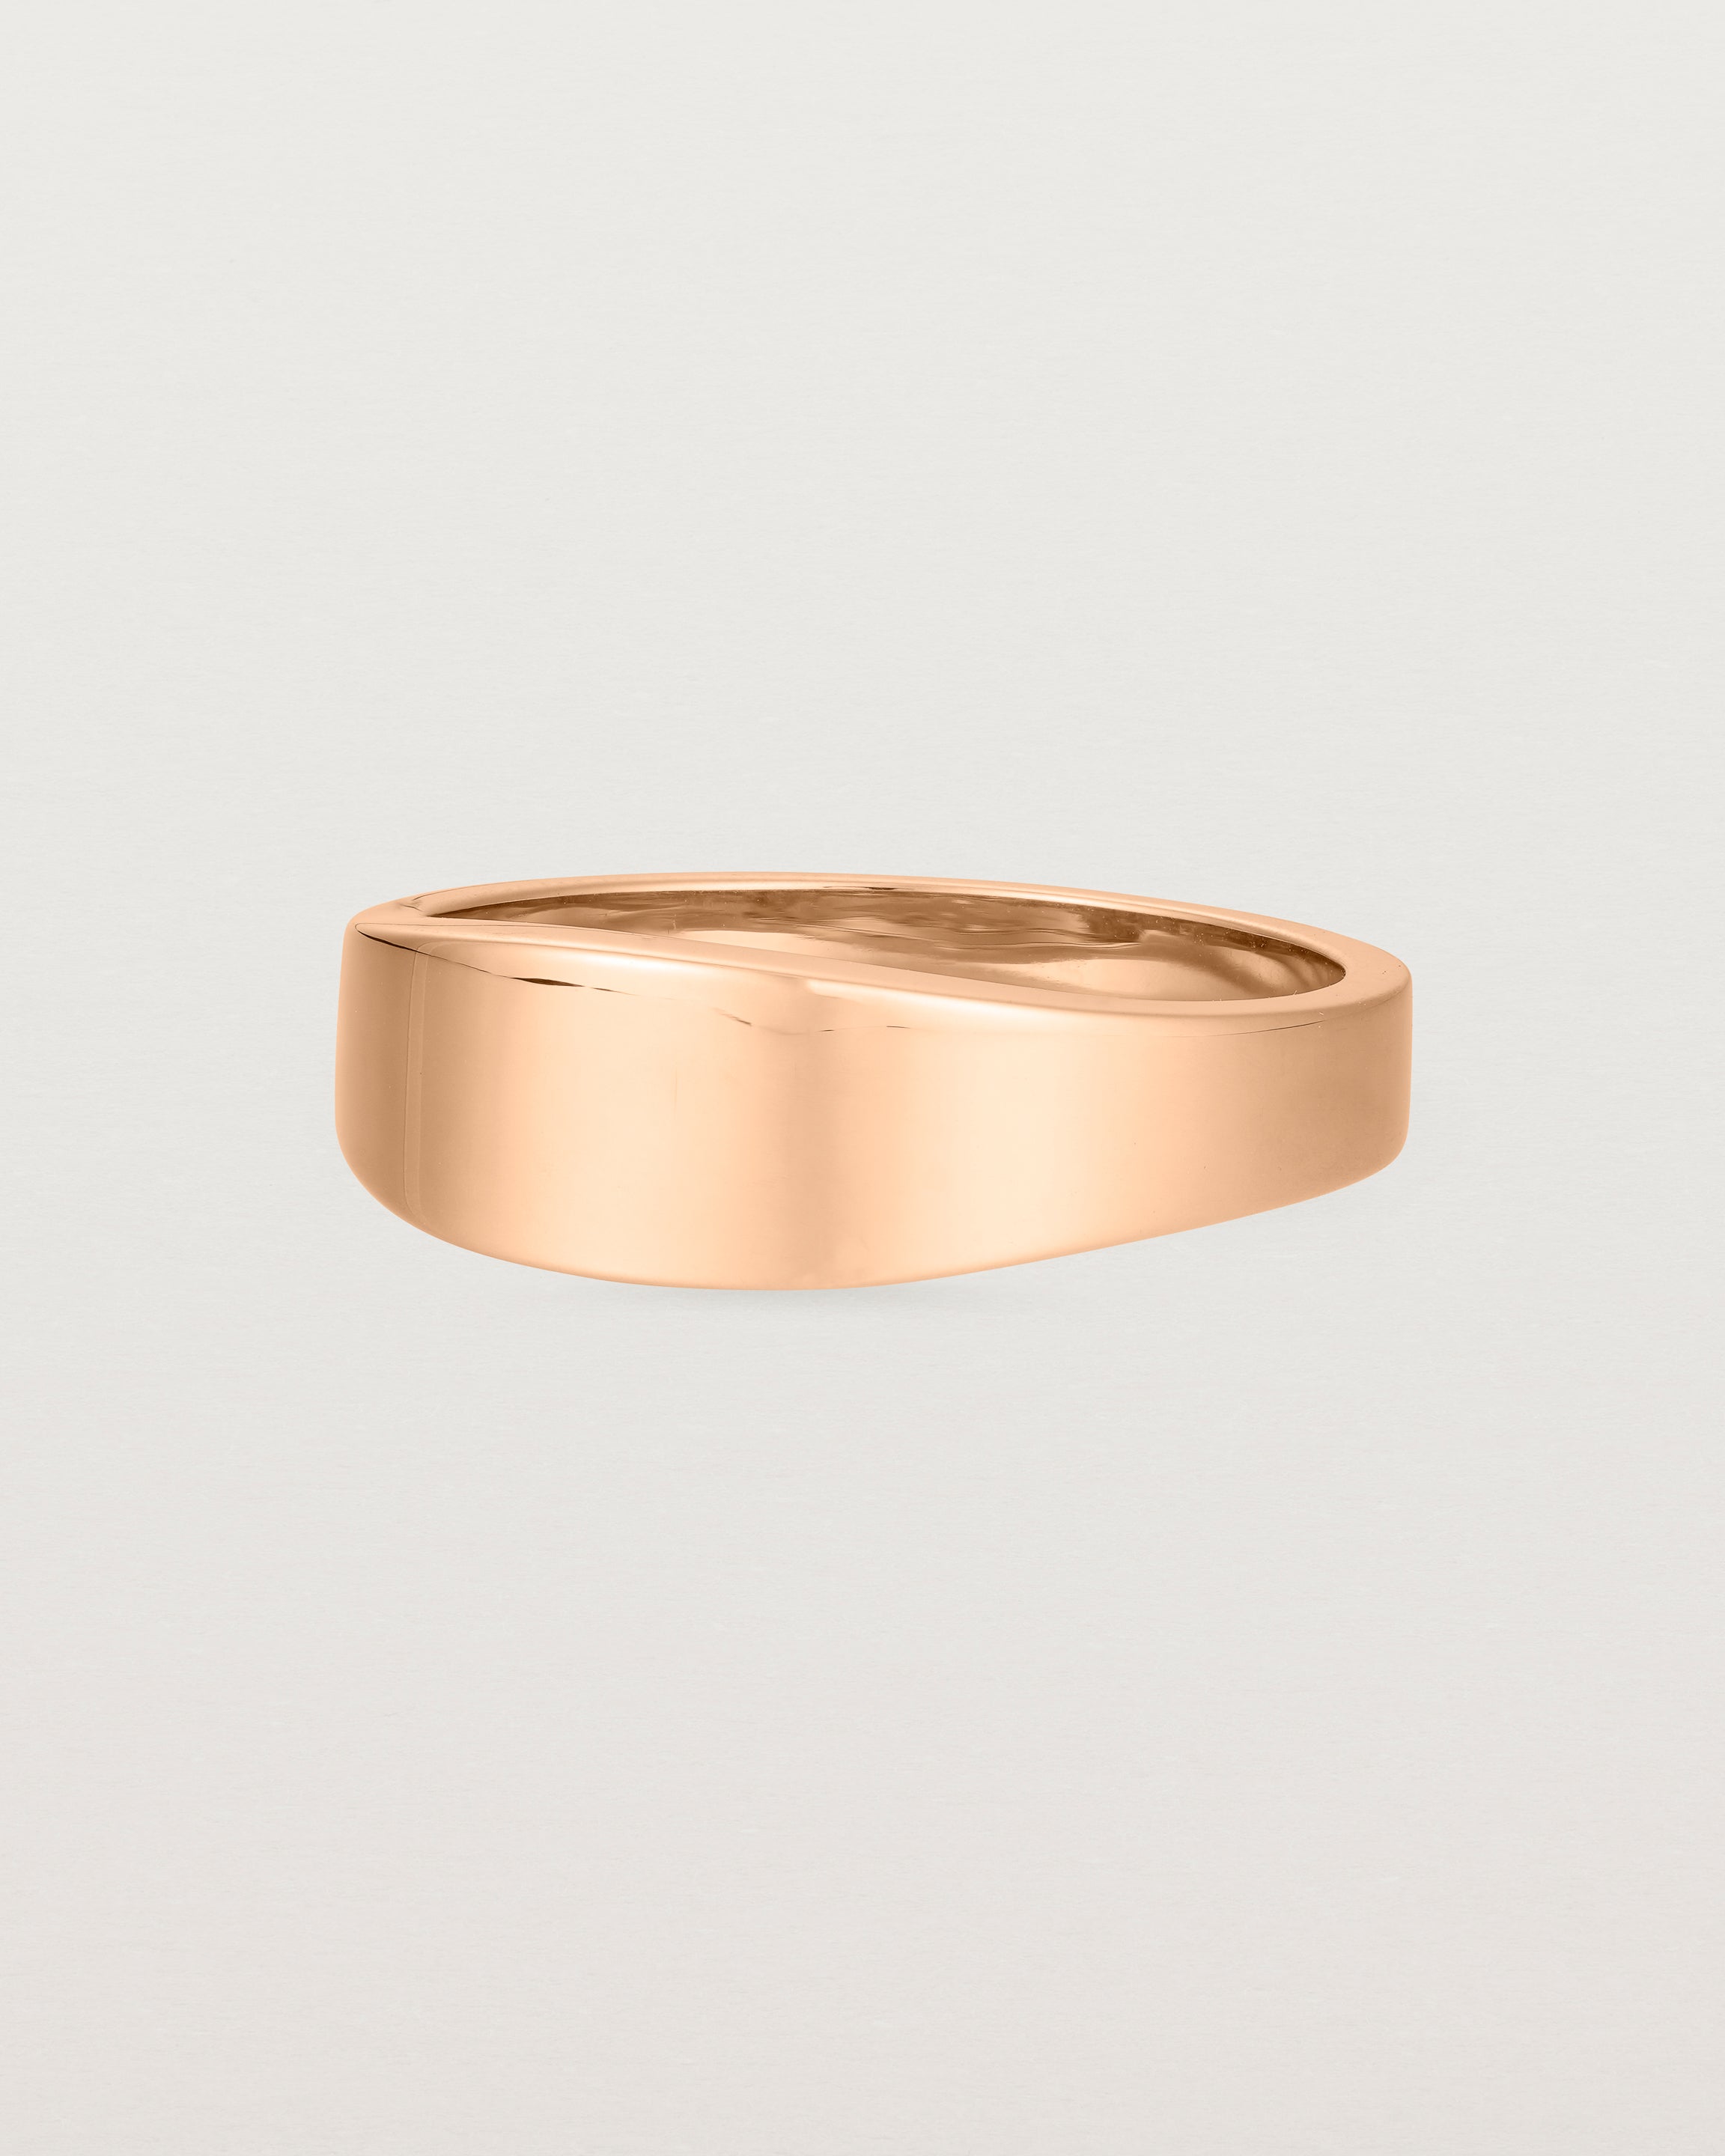 Angled view of the Amos Ring in Rose Gold.